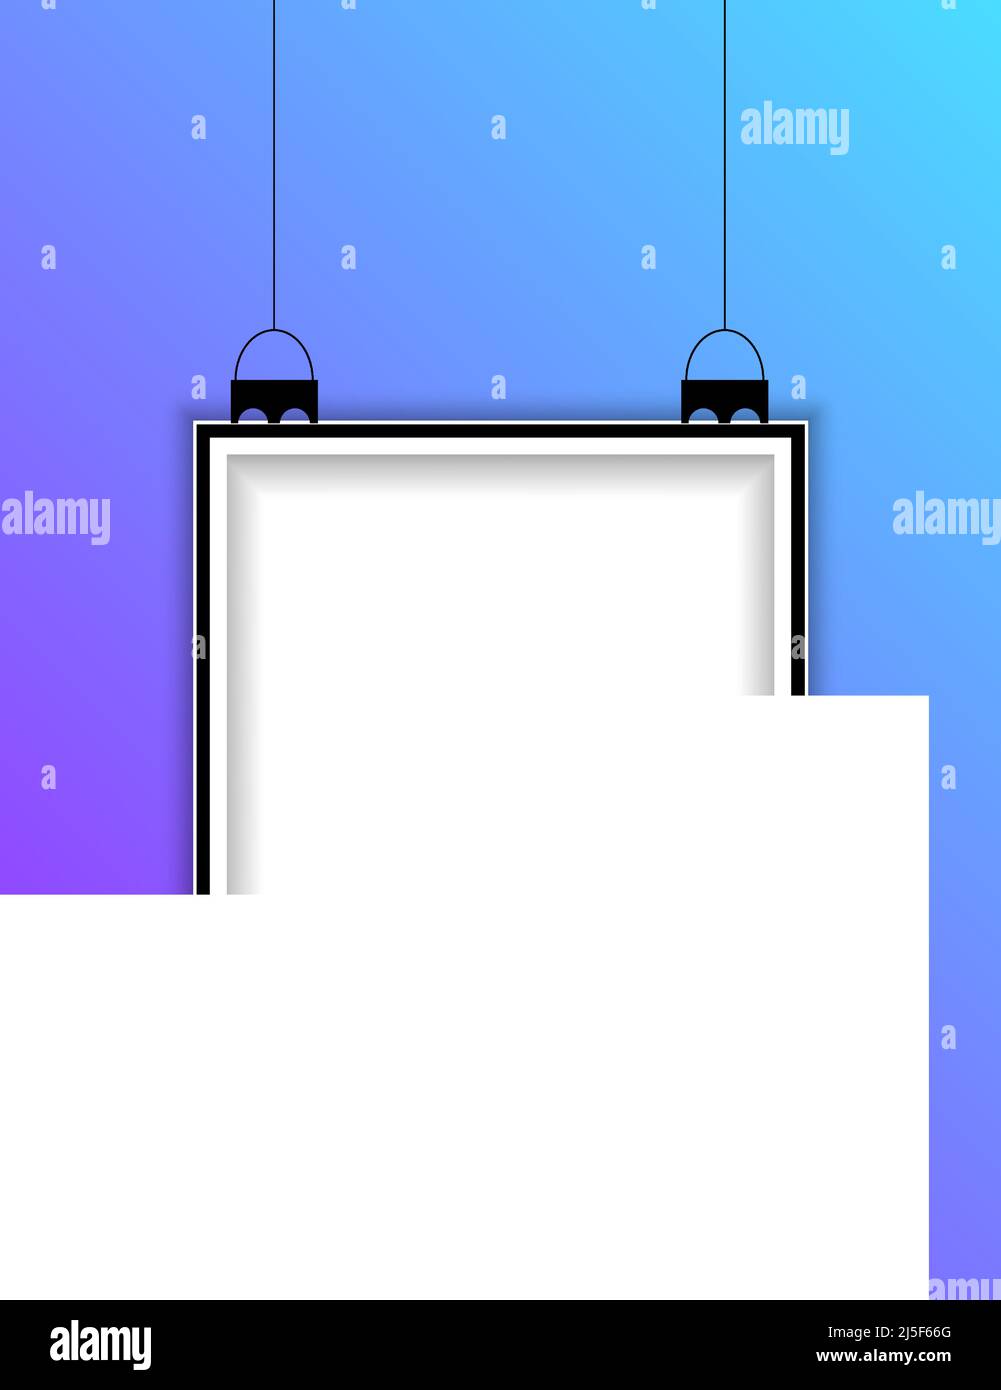 Realistic vertical hanging picture frame isolated on blue background. Blank hanging frame template. Empty hanging photo frame mockup. Stock Vector